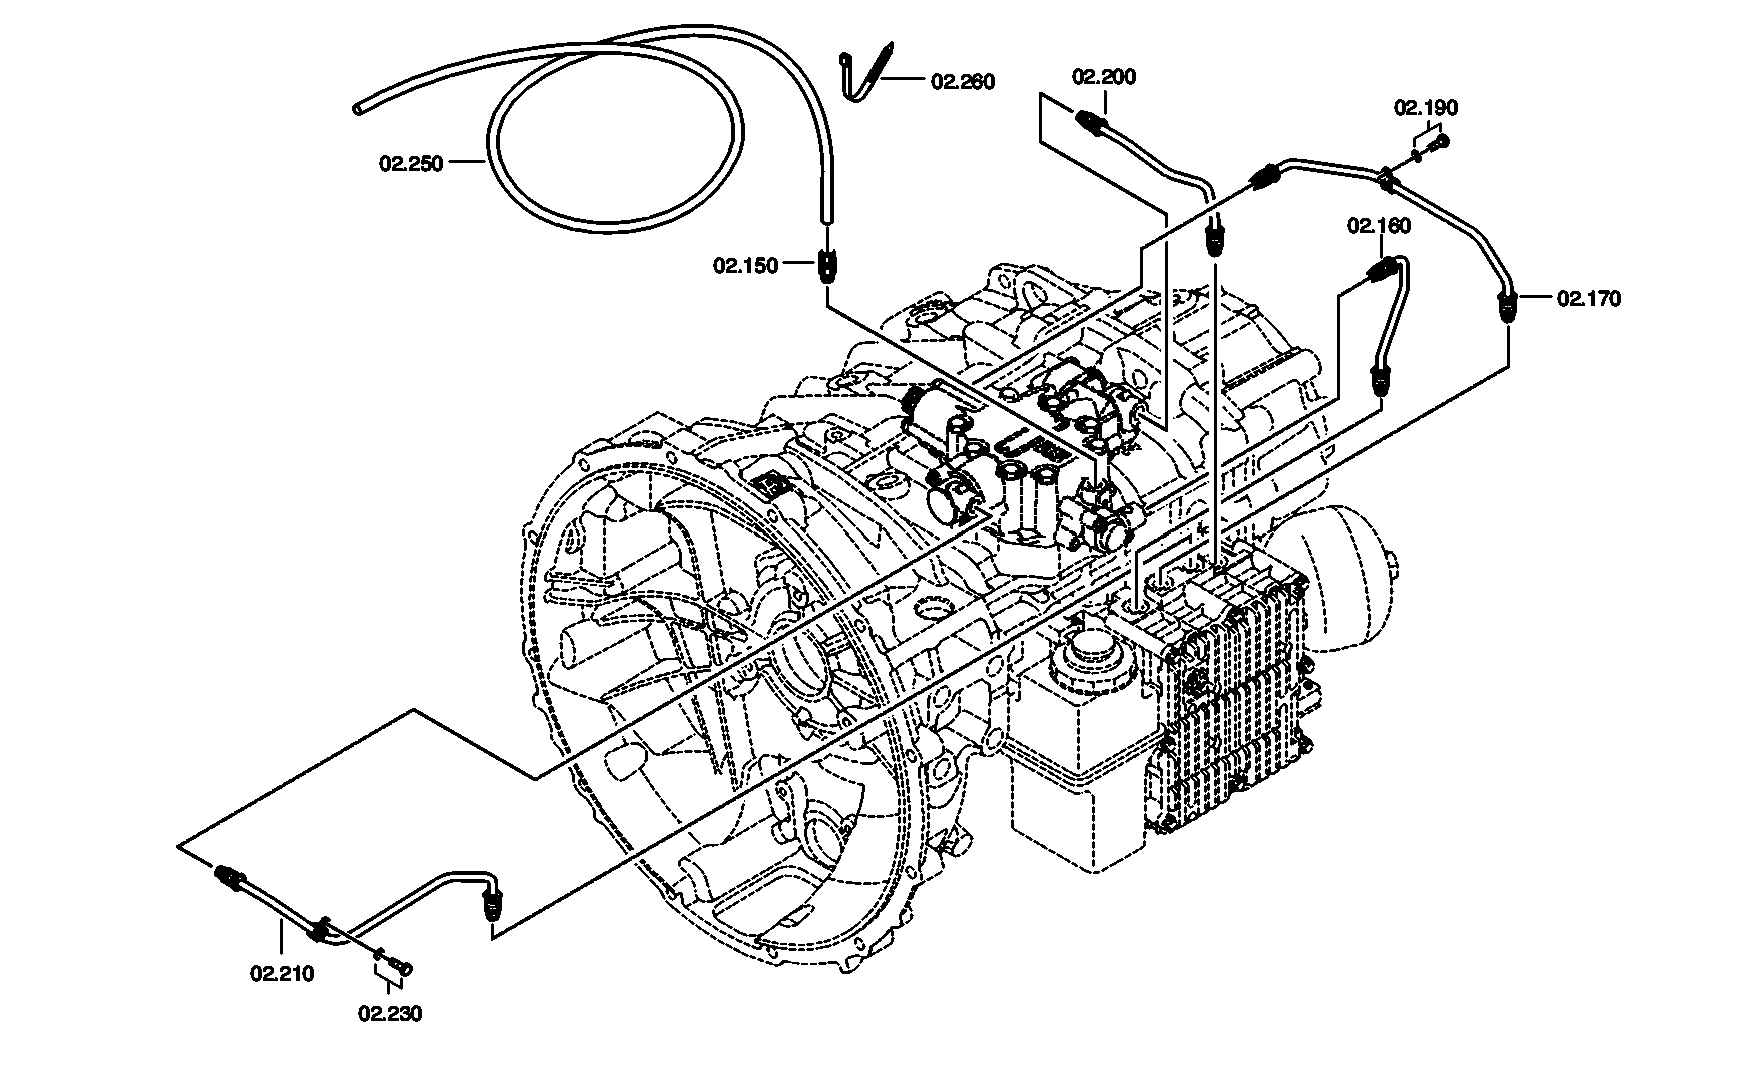 drawing for DAF 1821349 - TRANSMISSION ACTUATOR (figure 3)